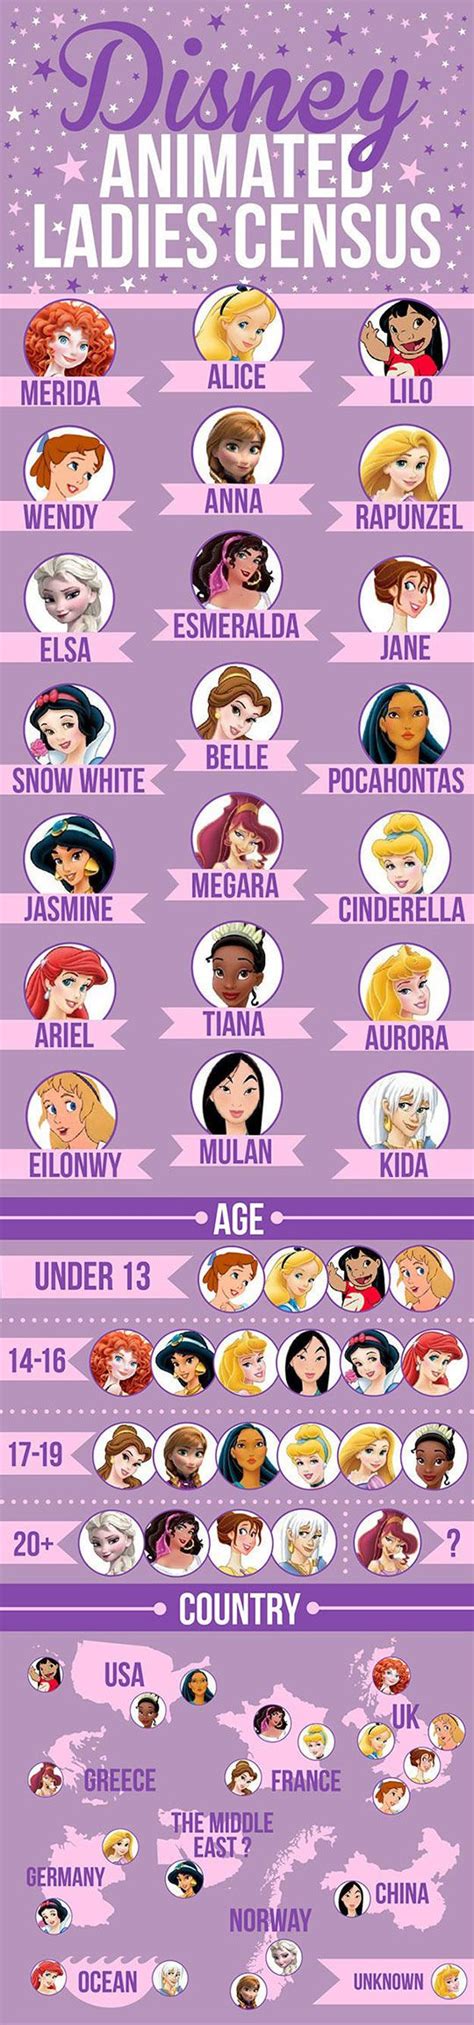 The Internets Most Asked Questions All Disney Princesses Disney Princess Names Disney Films